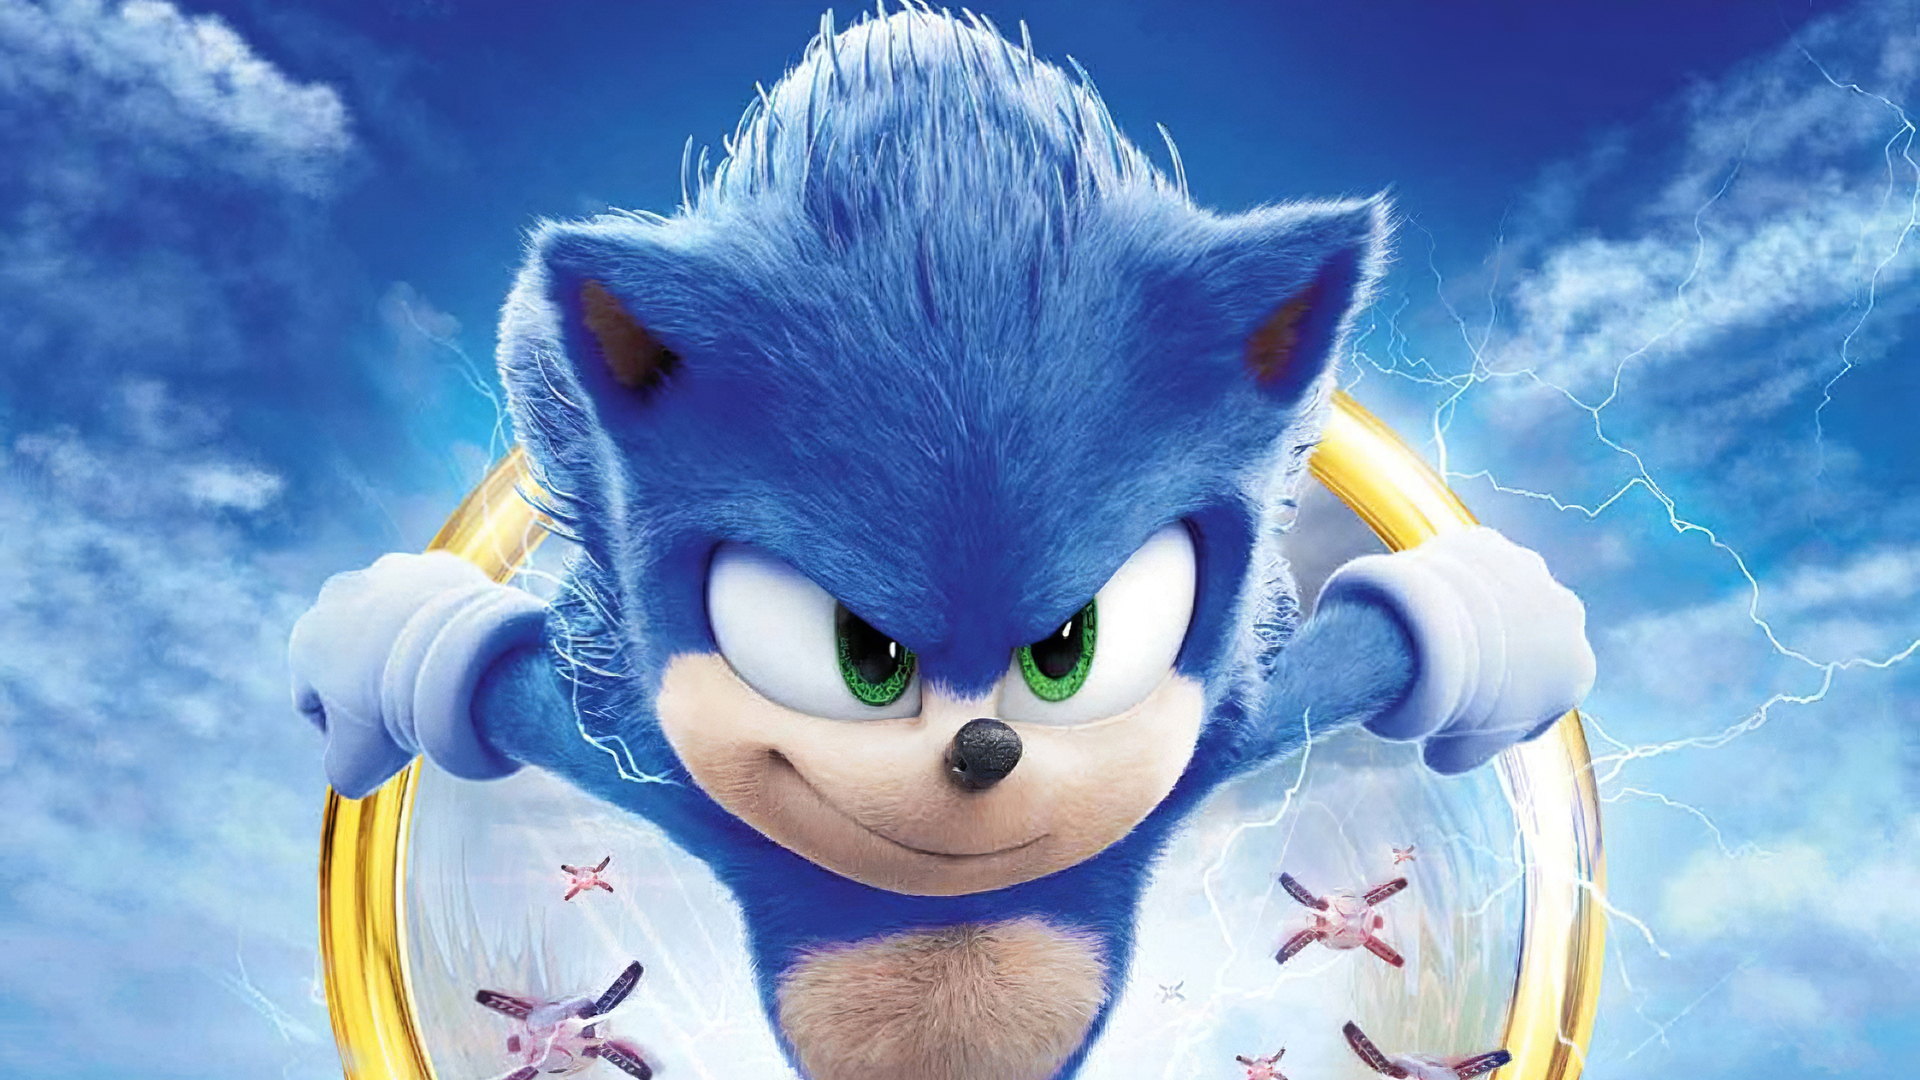 download free sonic kinect